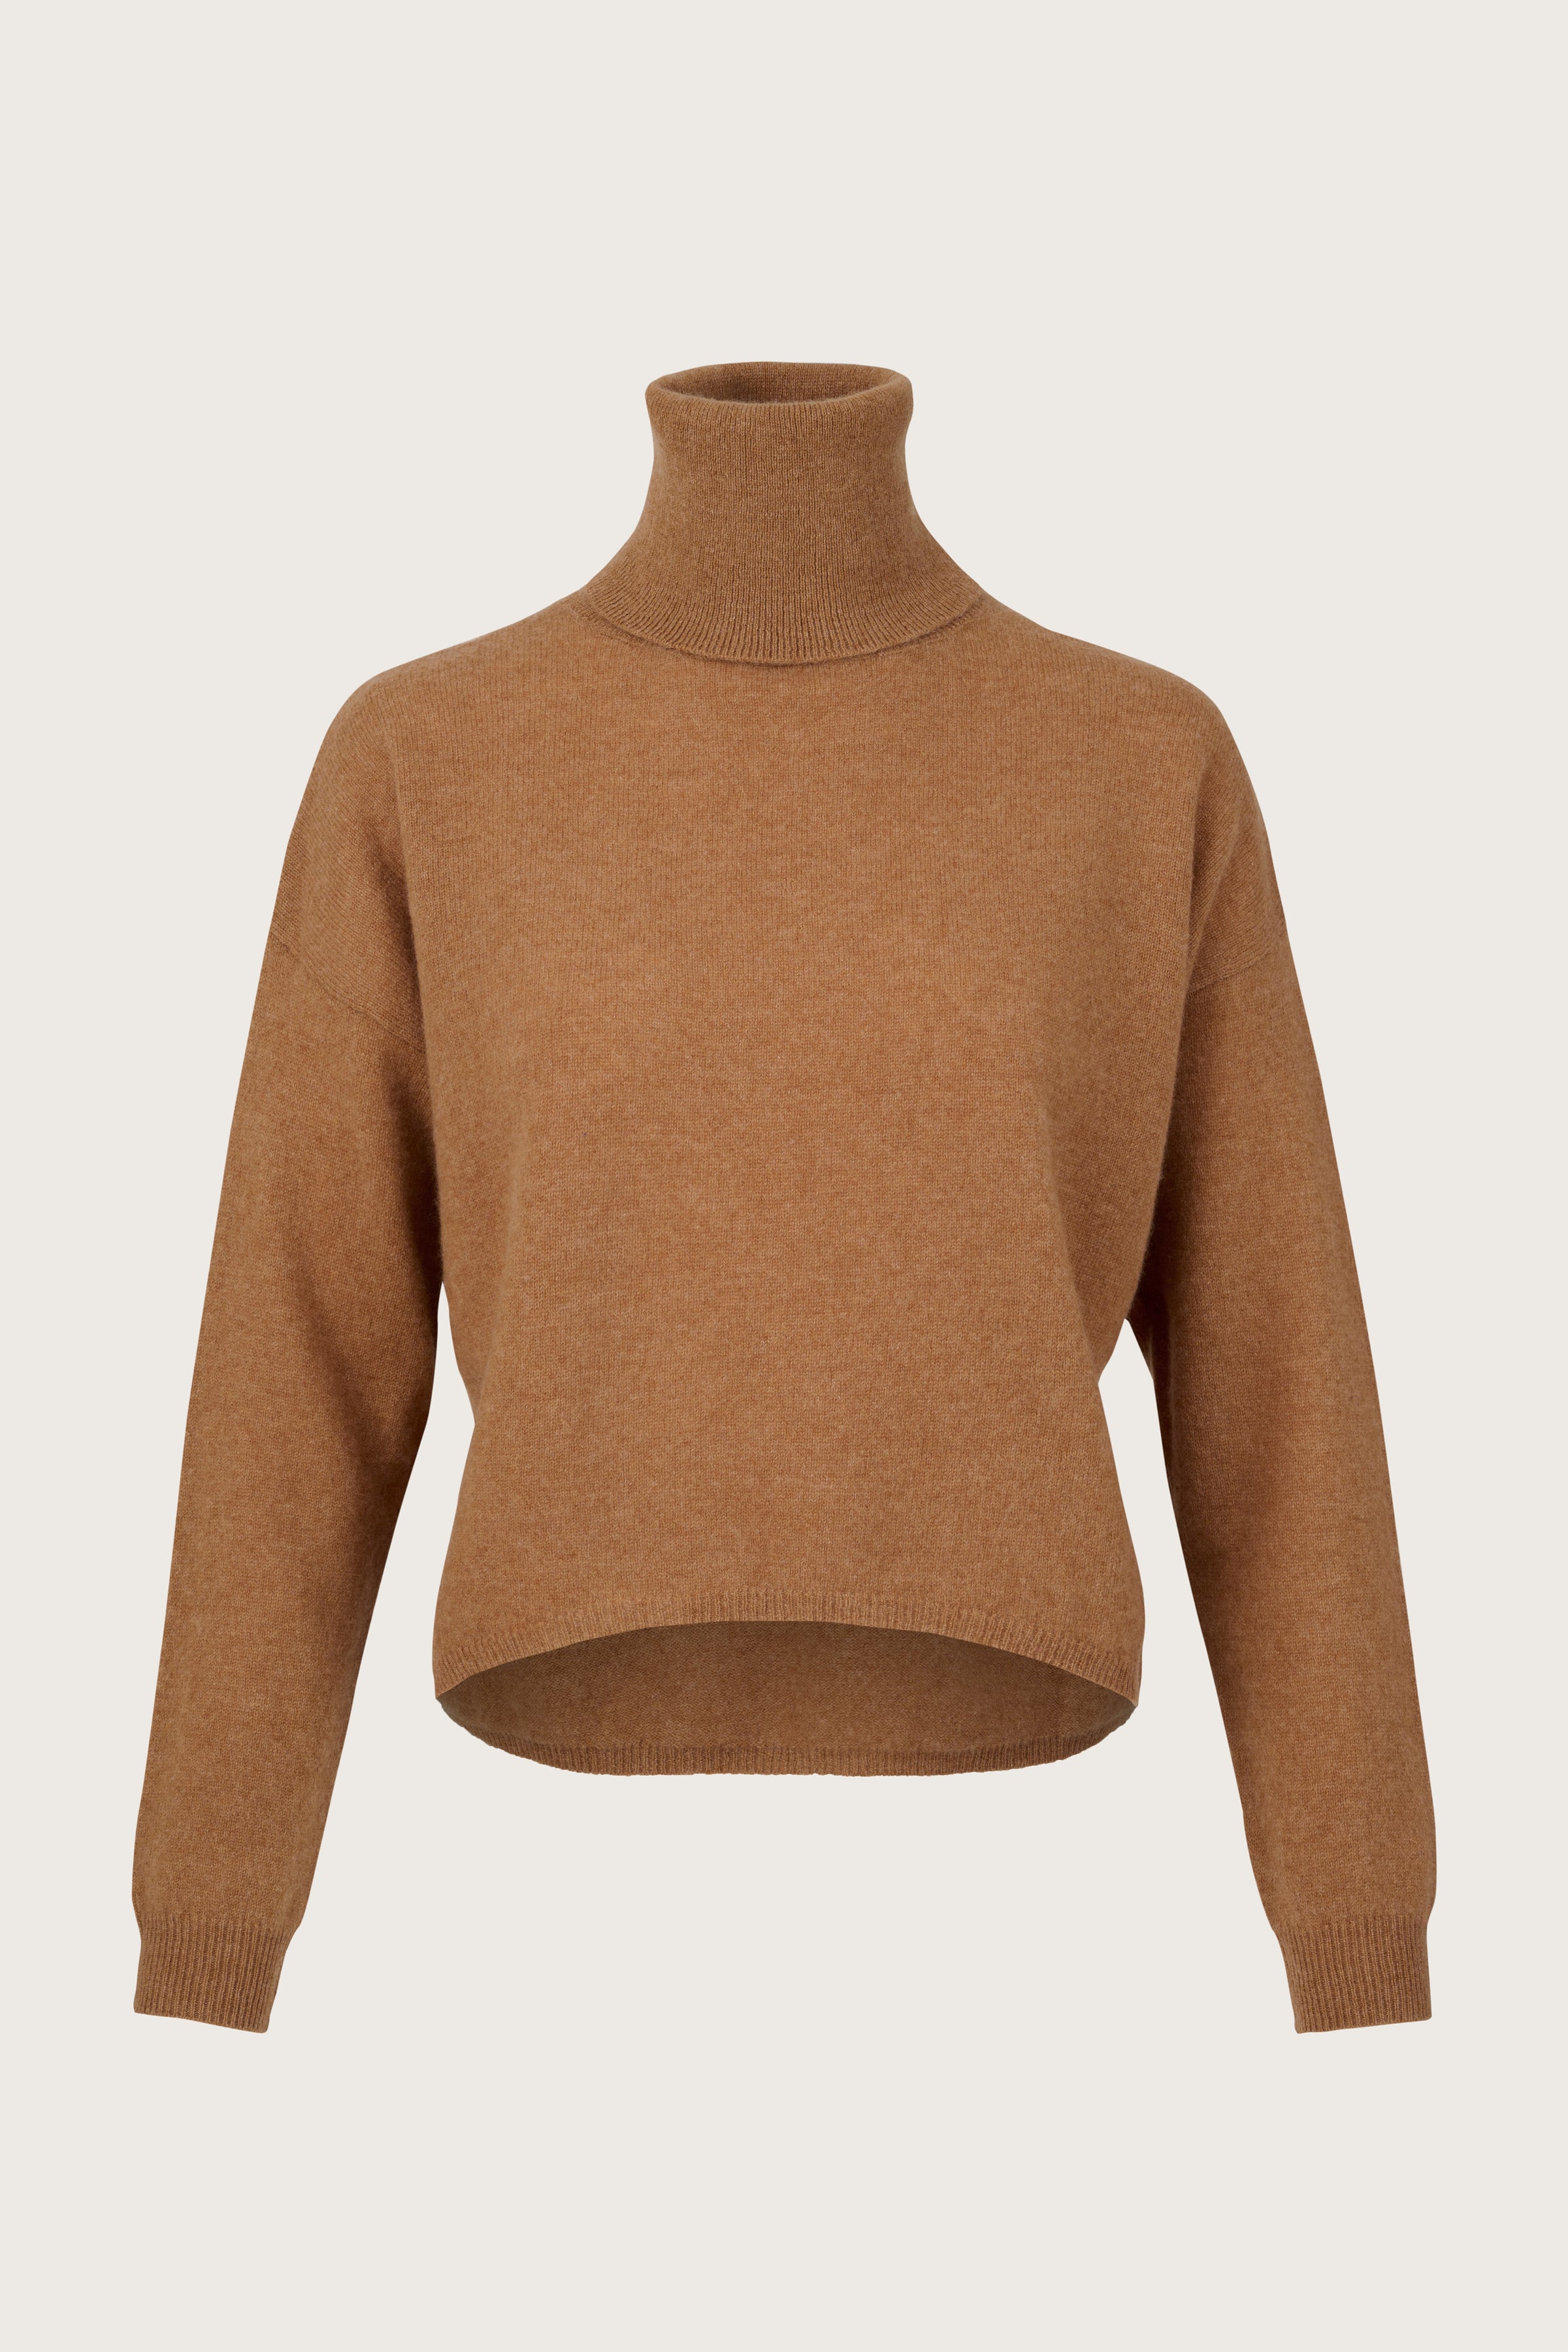 Cashmere roll neck in caramel